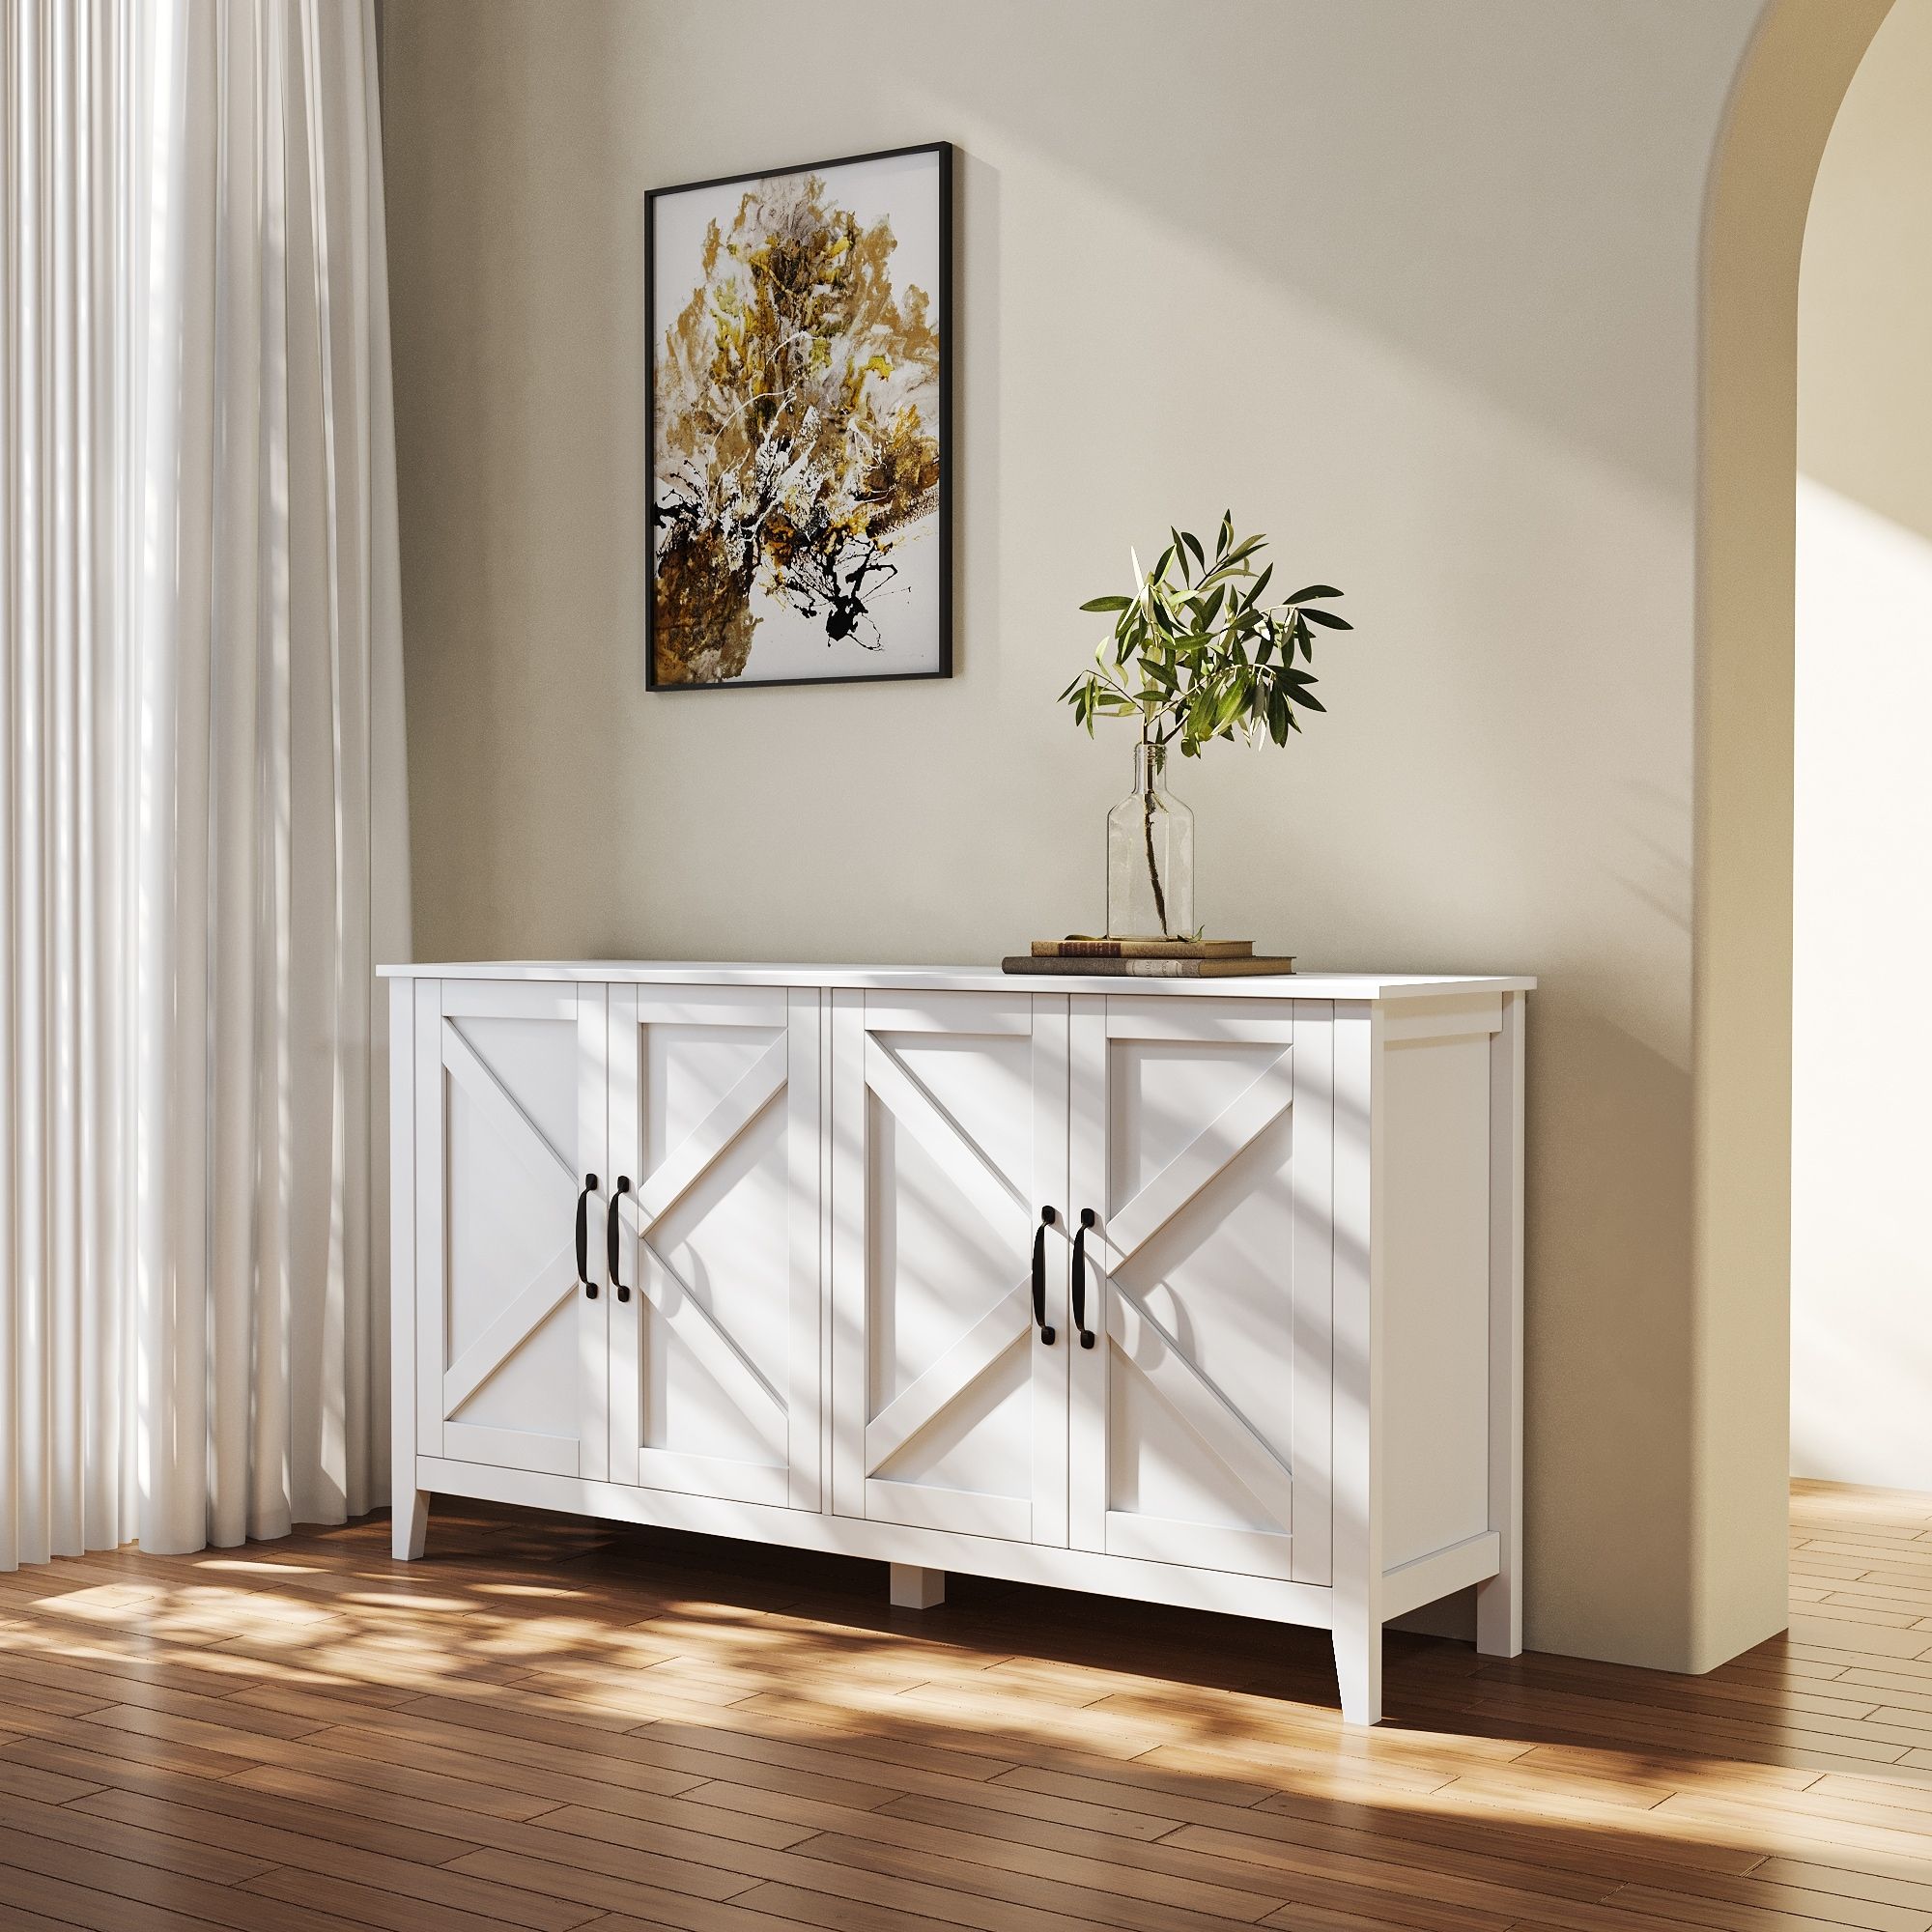 Sideboard Storage Entryway Floor Cabinet With 4 Shelves – Bed Bath & Beyond  – 37068169 Inside 2018 Sideboards For Entryway (View 7 of 15)